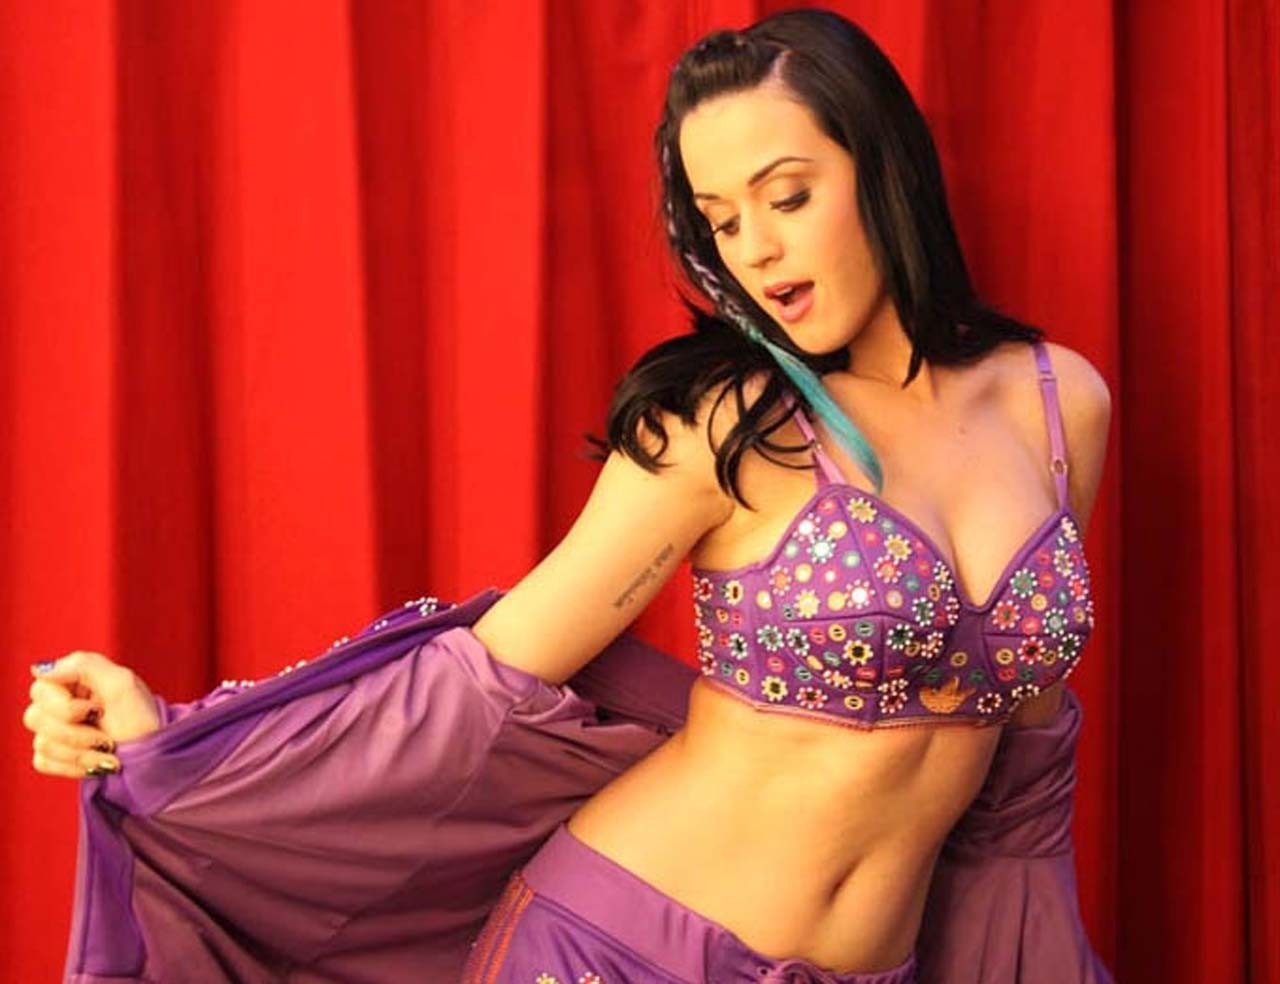 Katy Perry exposant son corps sexy et ses superbes seins.
 #75312704